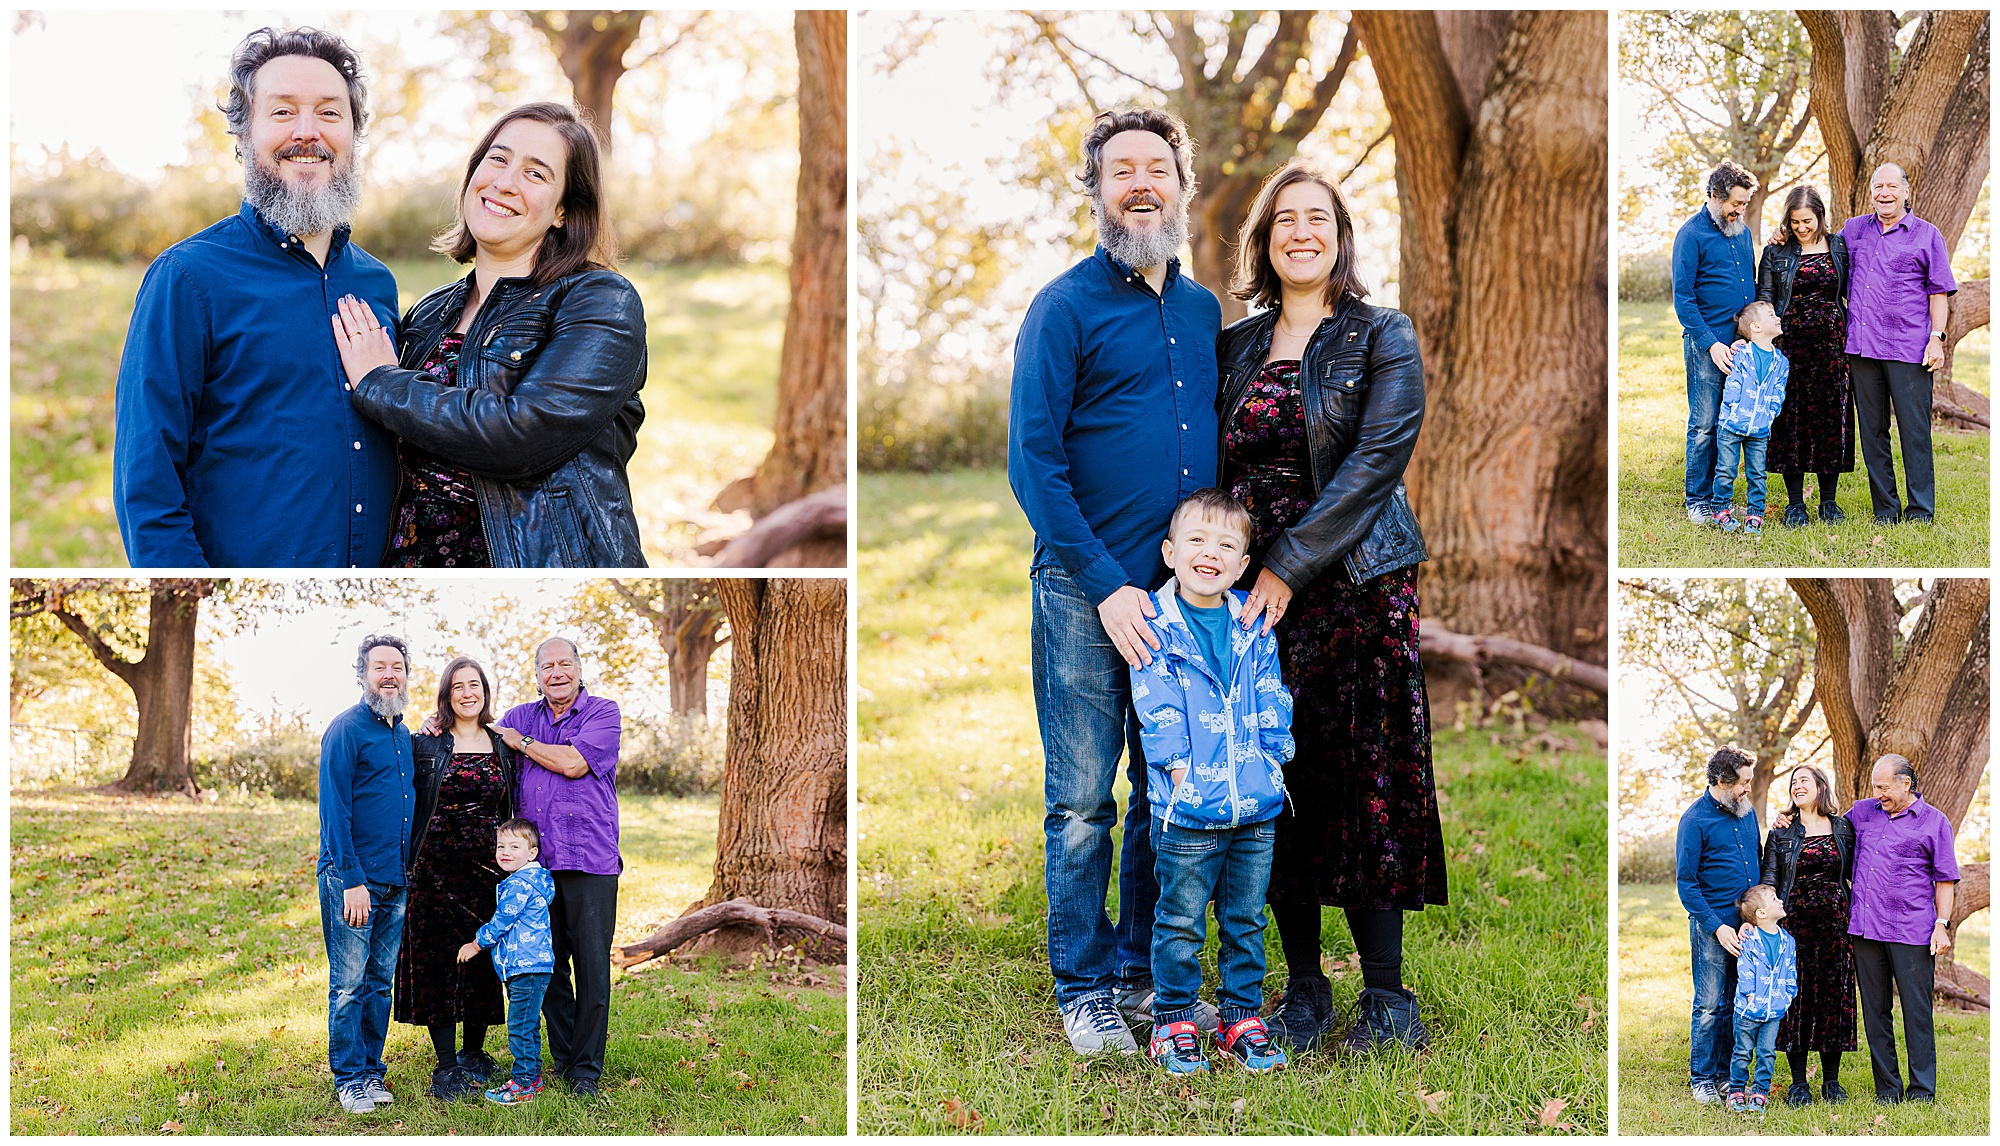 Charming family photos with Hudson Valley photographers